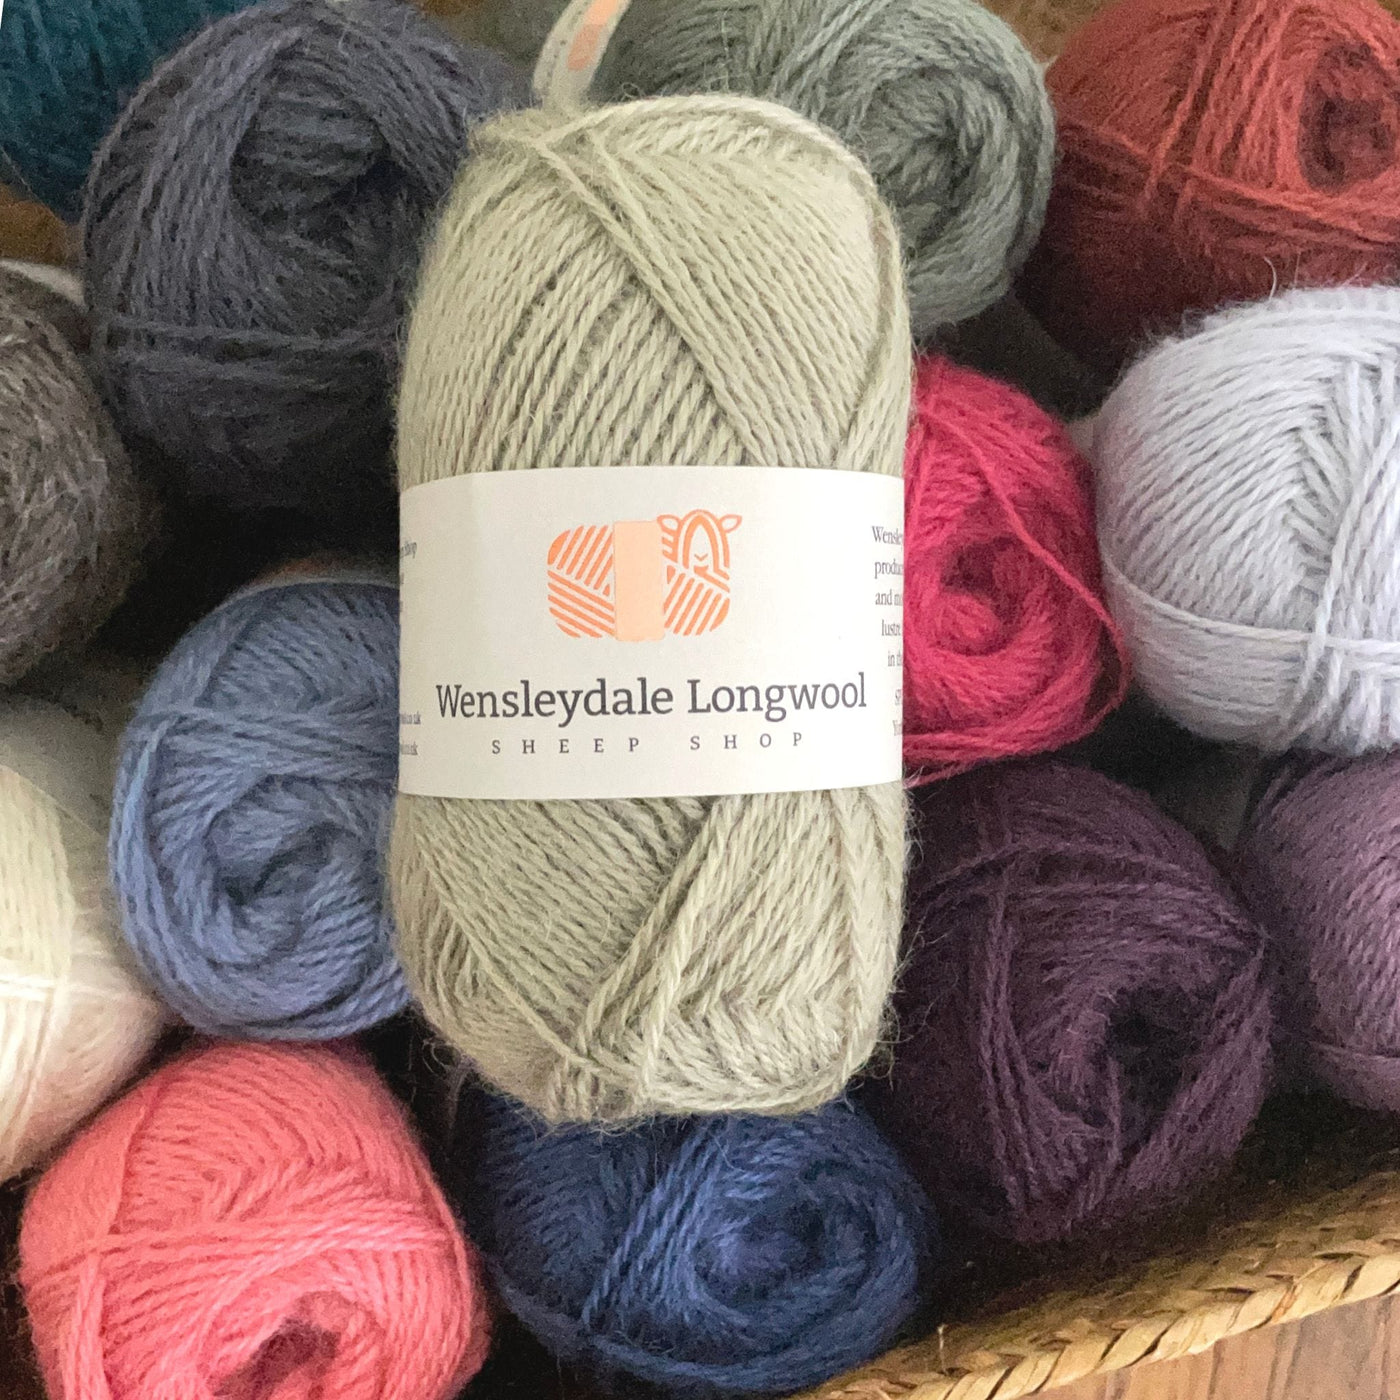 A pile of 50 gram balls of Wensleydale Longwool Sheep Shop 4ply yarn, a fingering weight yarn, in a variety of colors with a light sage green ball on top